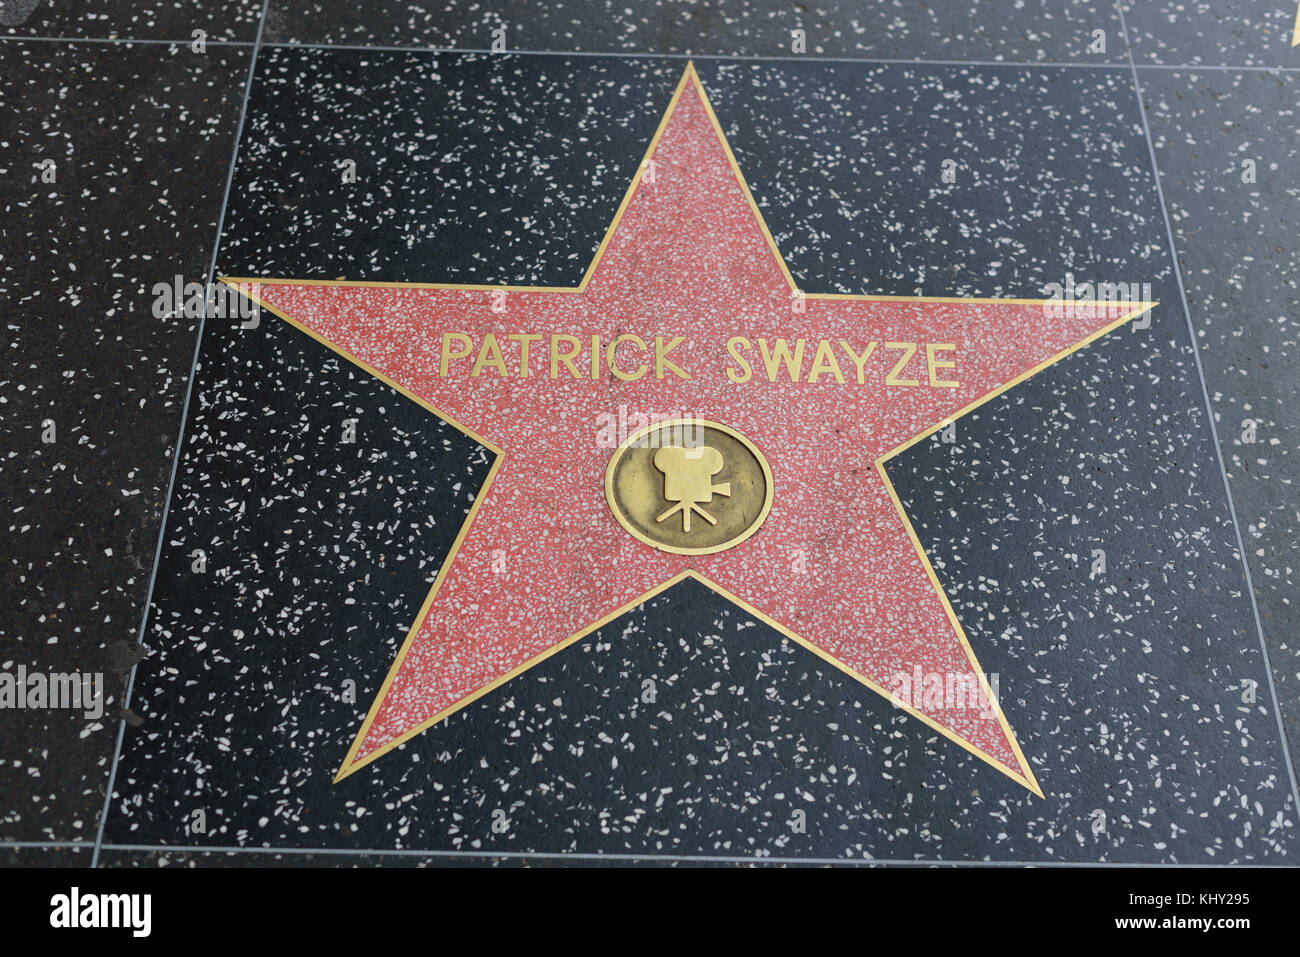 HOLLYWOOD, CA - DECEMBER 06: Patrick Swayze star on the Hollywood Walk of Fame in Hollywood, California on Dec. 6, 2016. Stock Photo